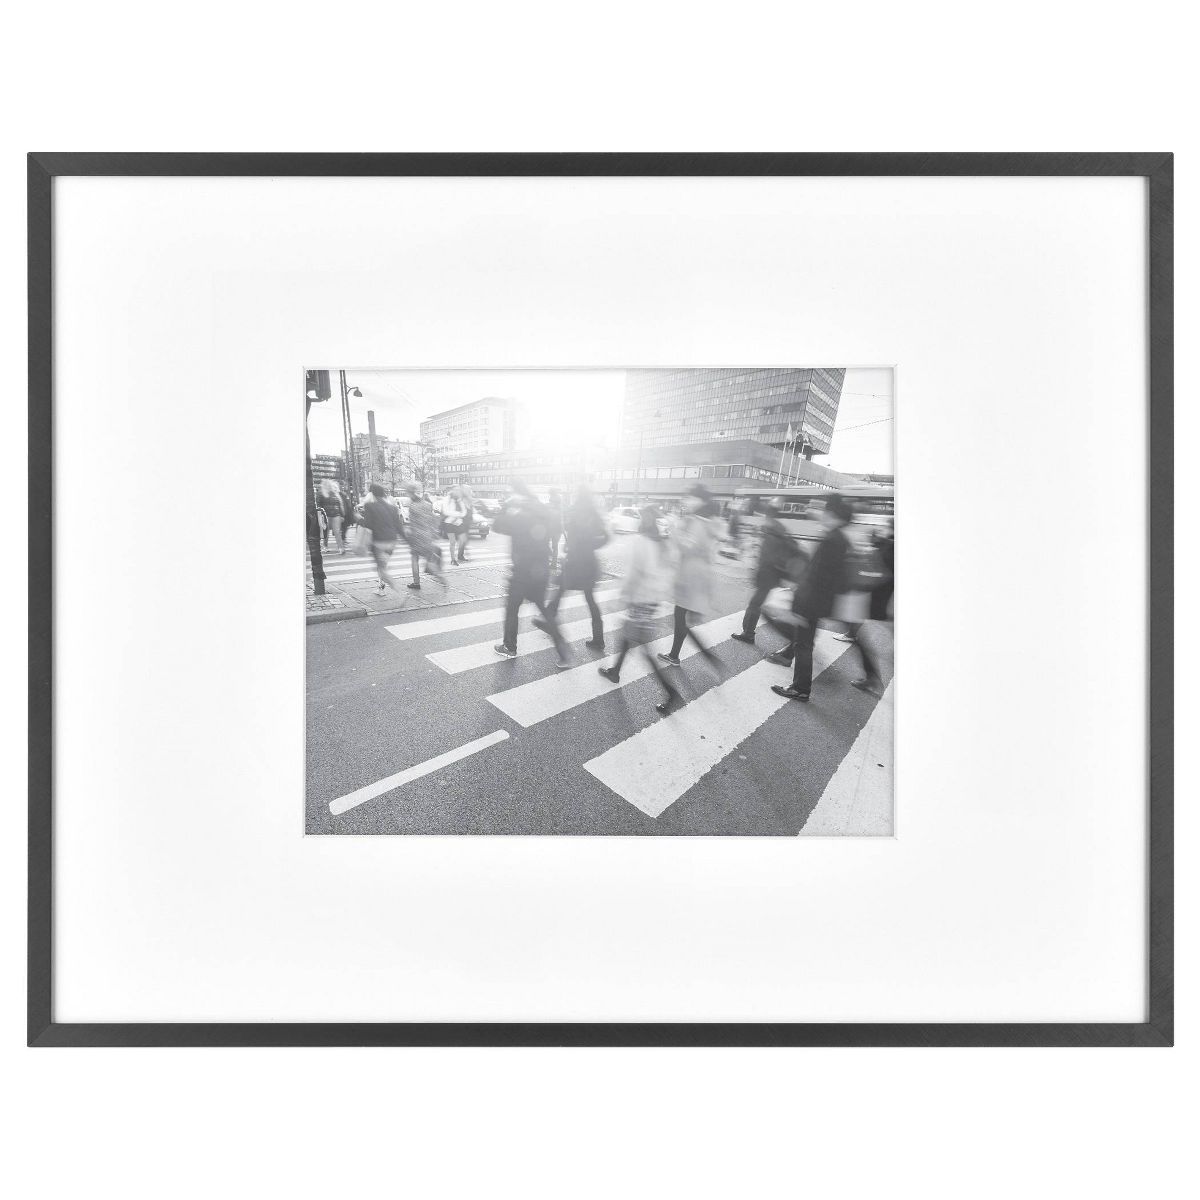 15.4" x 21.4" Matted to 11" x 17" Thin Metal Gallery Frame Black - Threshold™ | Target